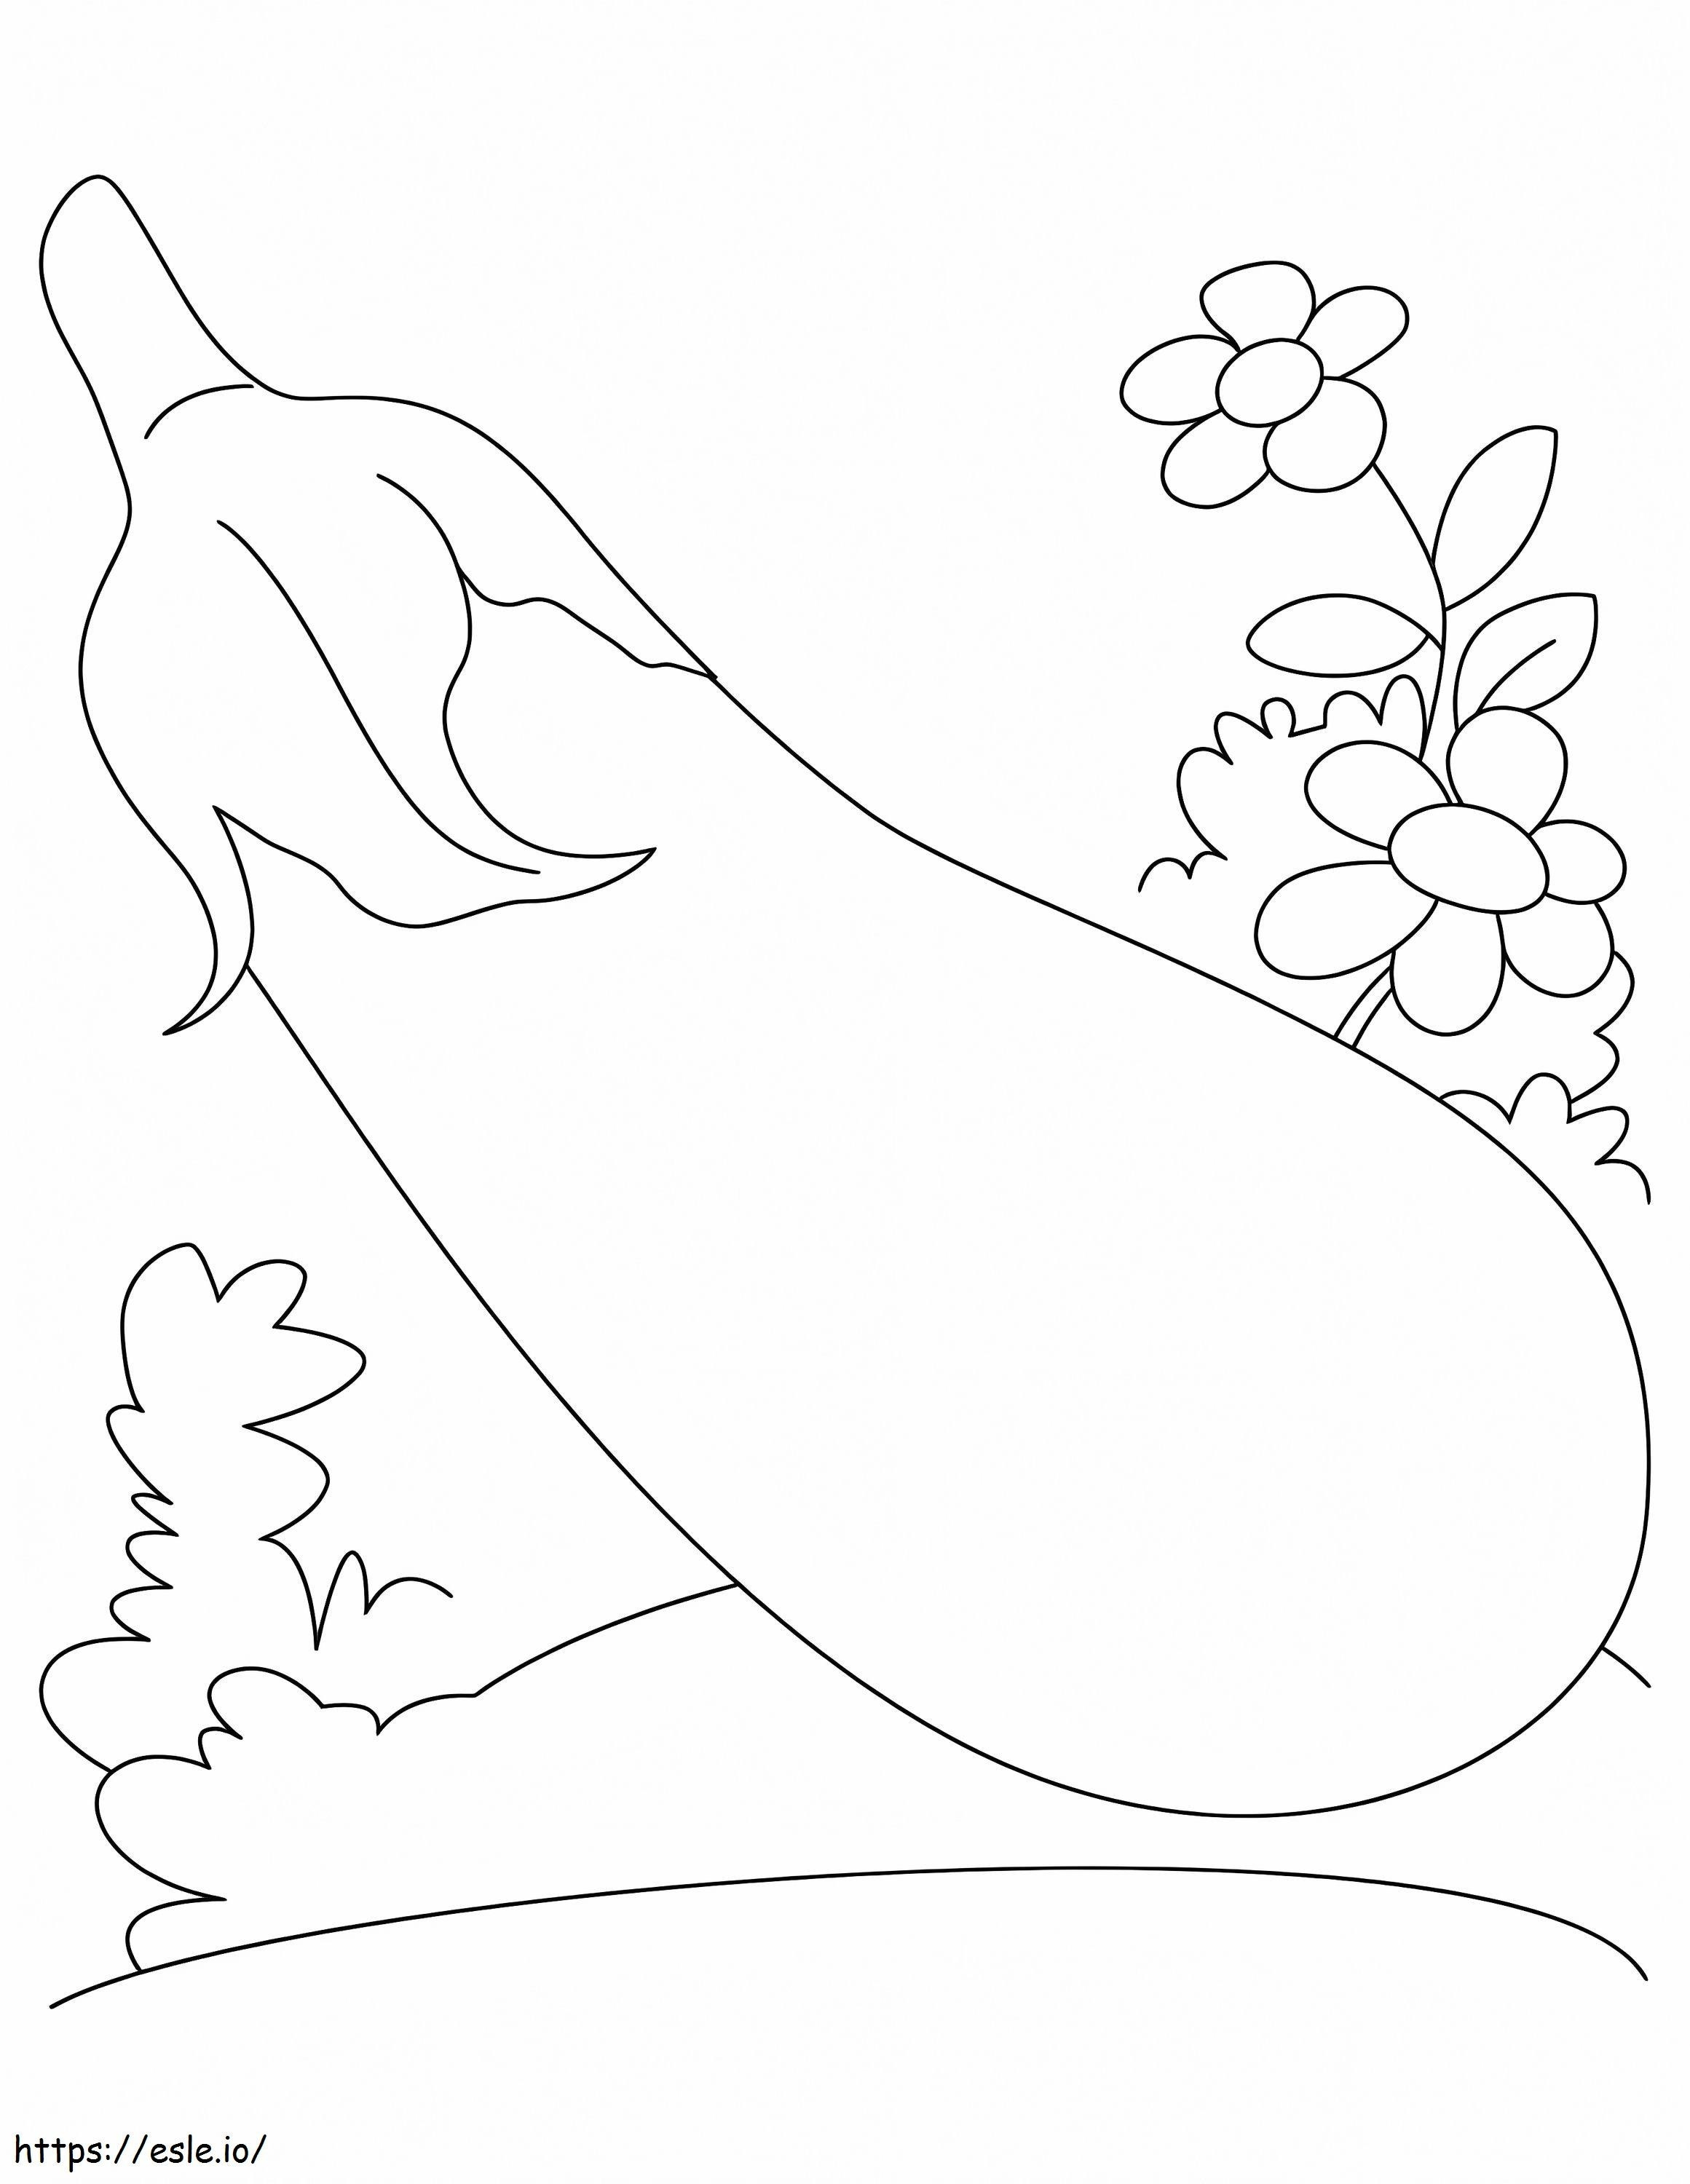 Eggplant With Flower coloring page